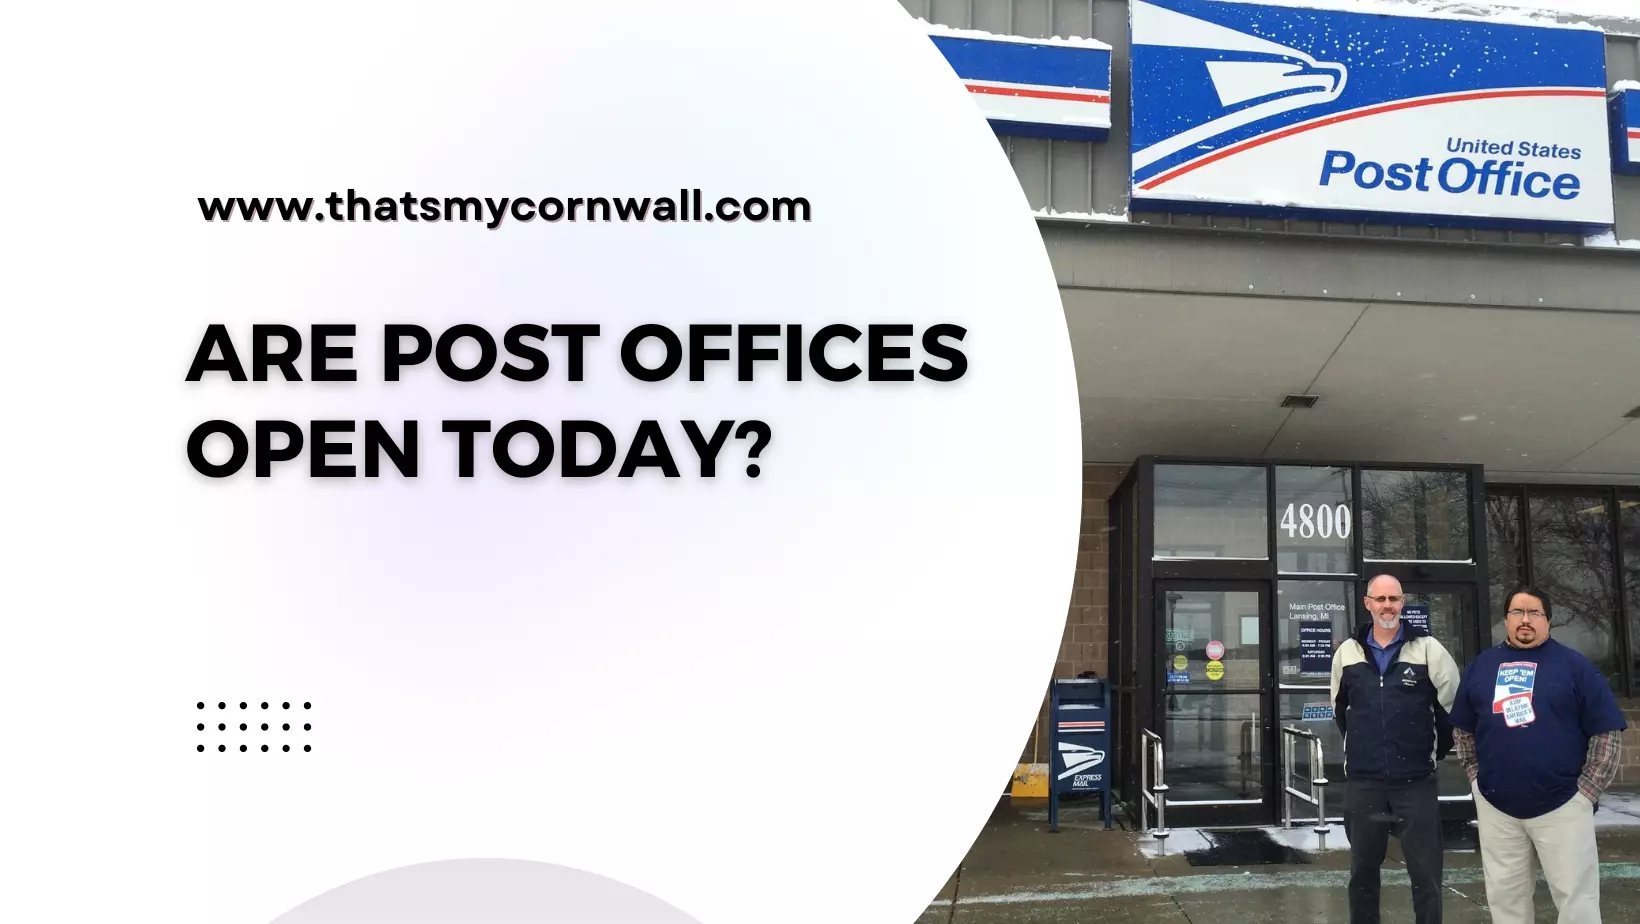 Are post offices open today?